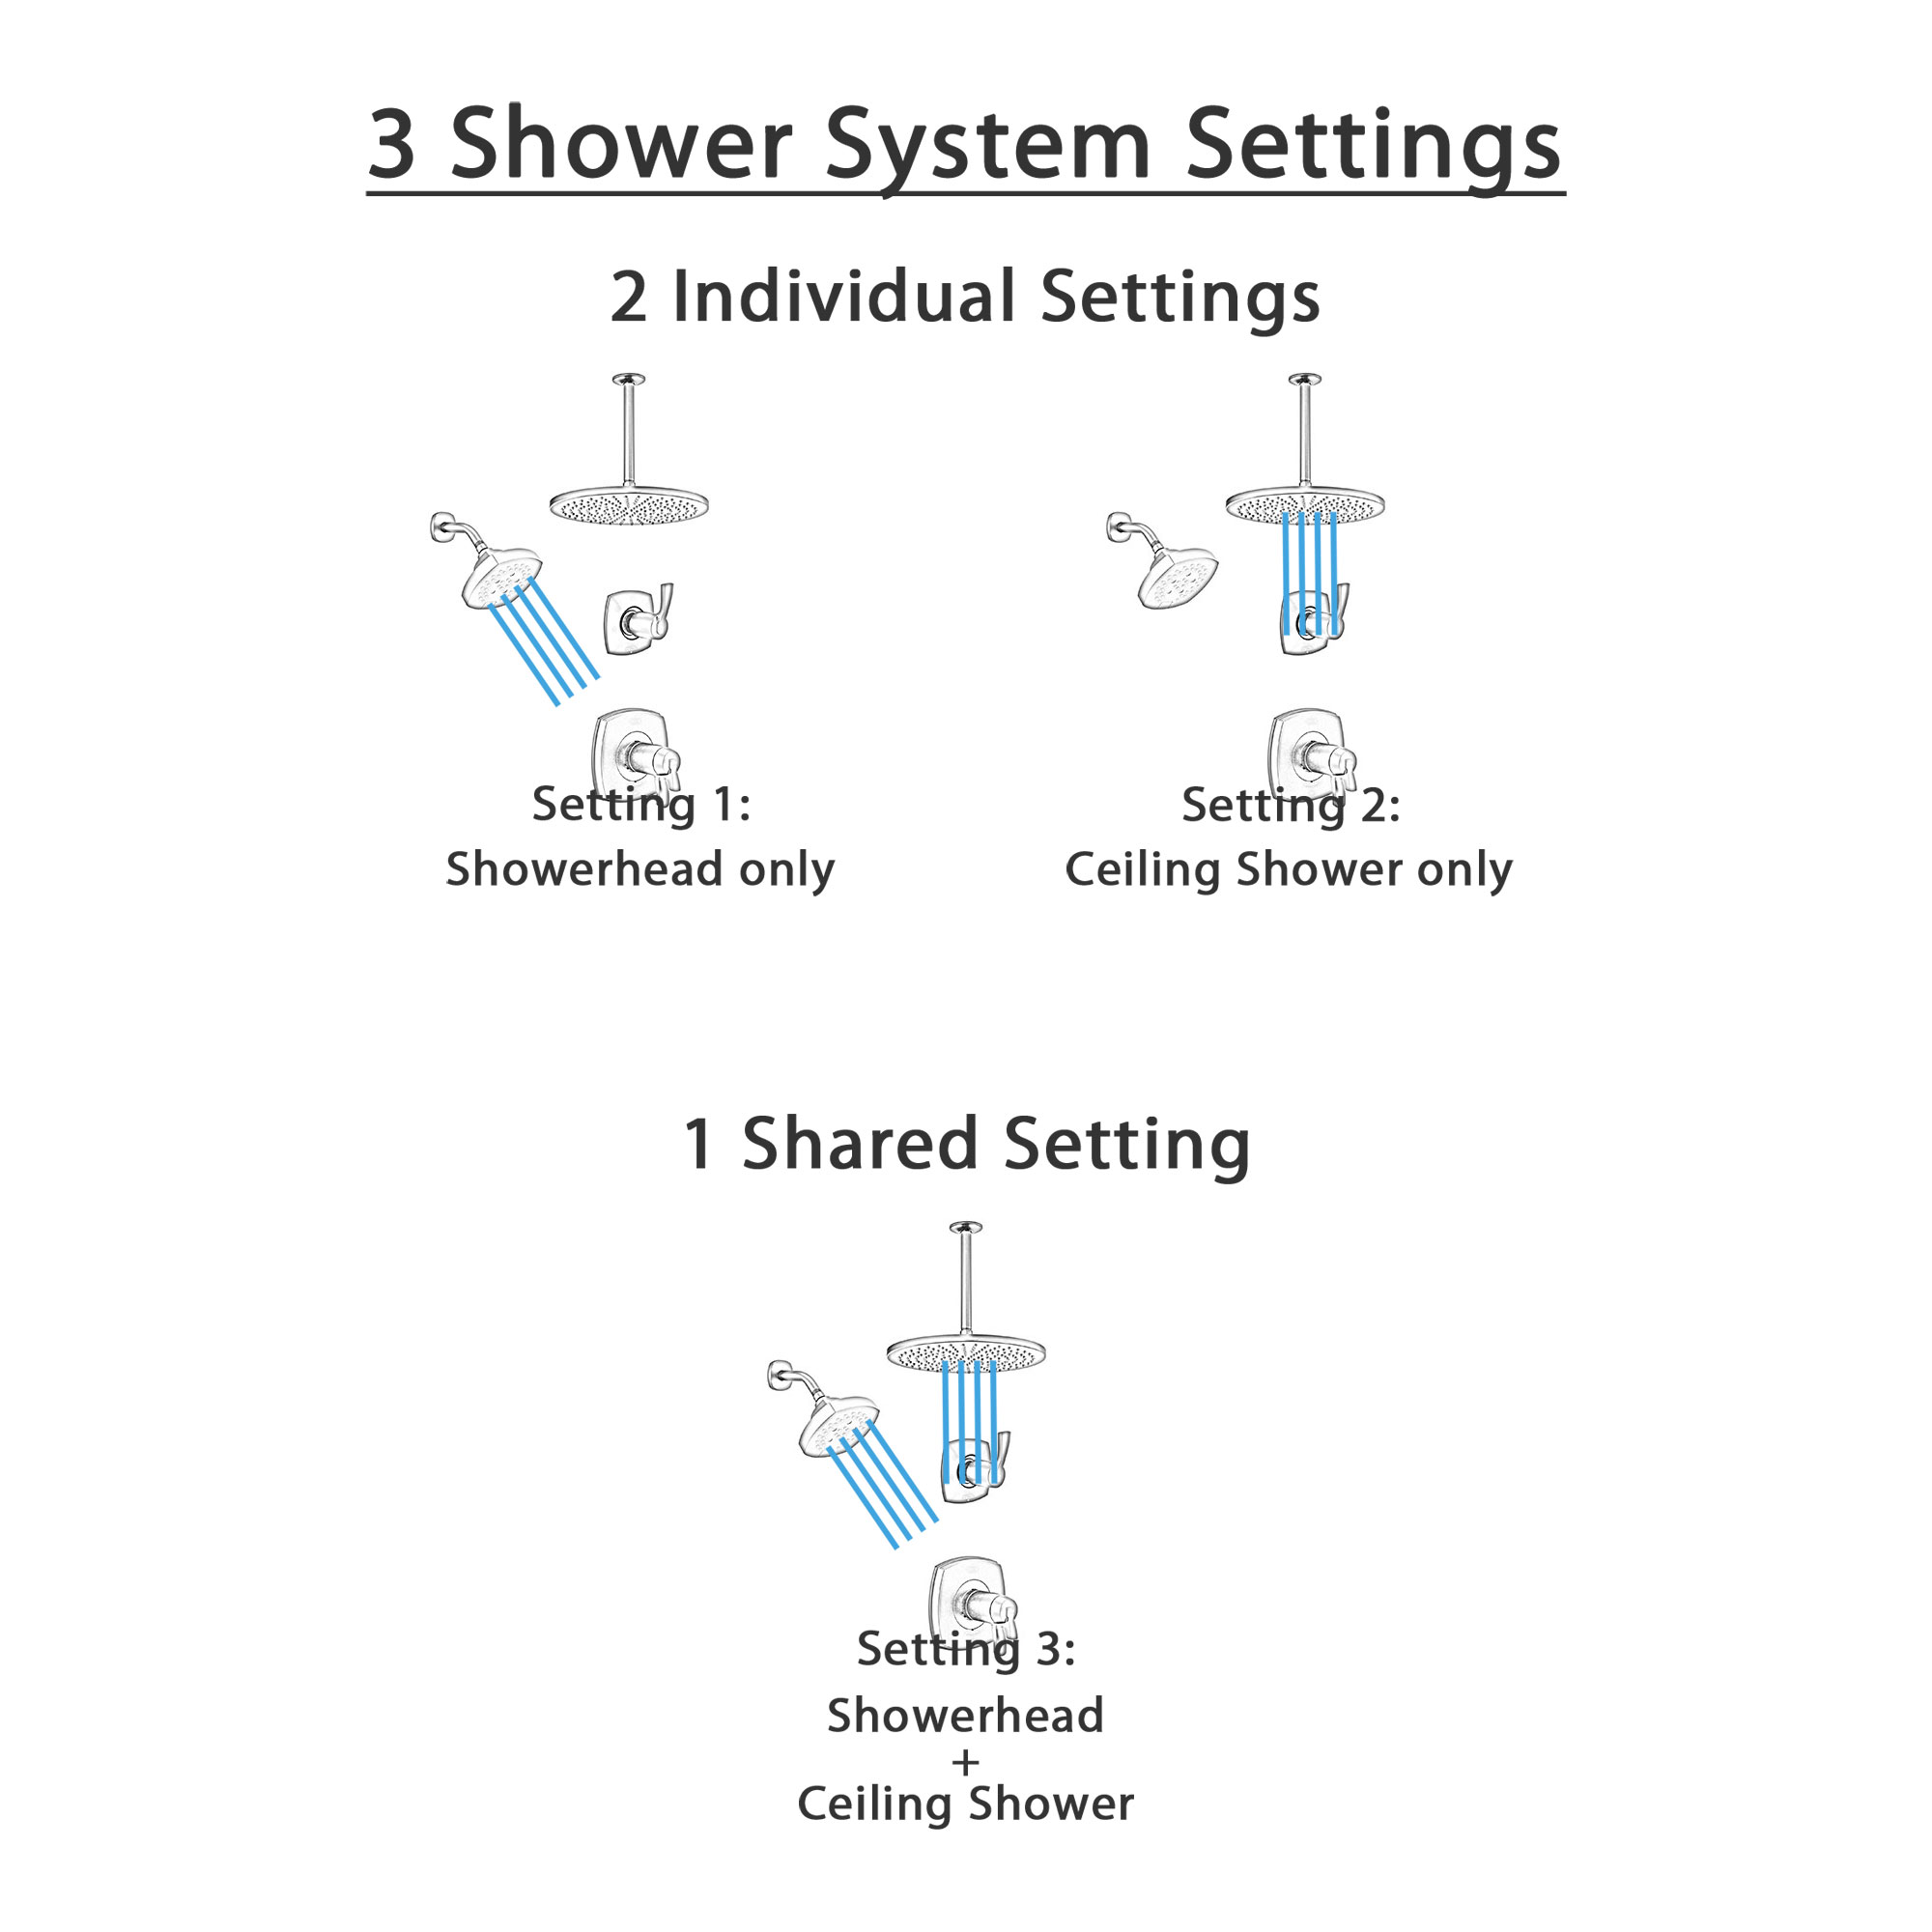 Delta Stryke Matte Black Finish Shower System with 2 Showerheads: Large Ceiling Mount Rain Showerhead and Multi-Setting Wall Showerhead SS17T2763BL1